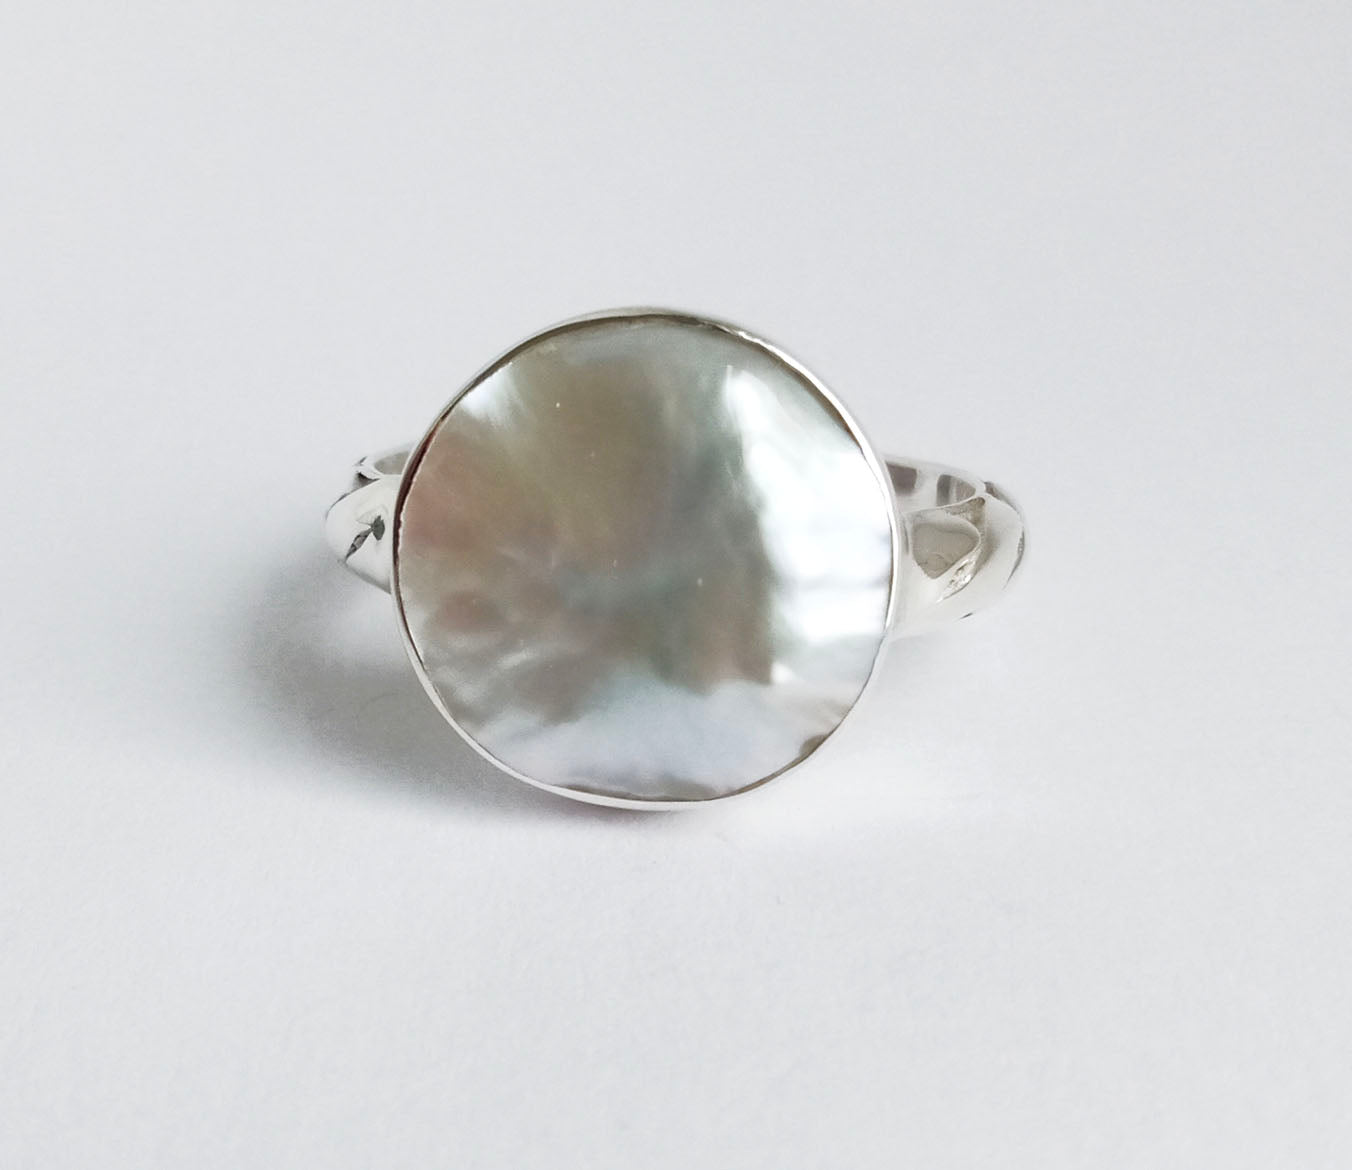 Baroque Pearl Silver Ring with Open Back